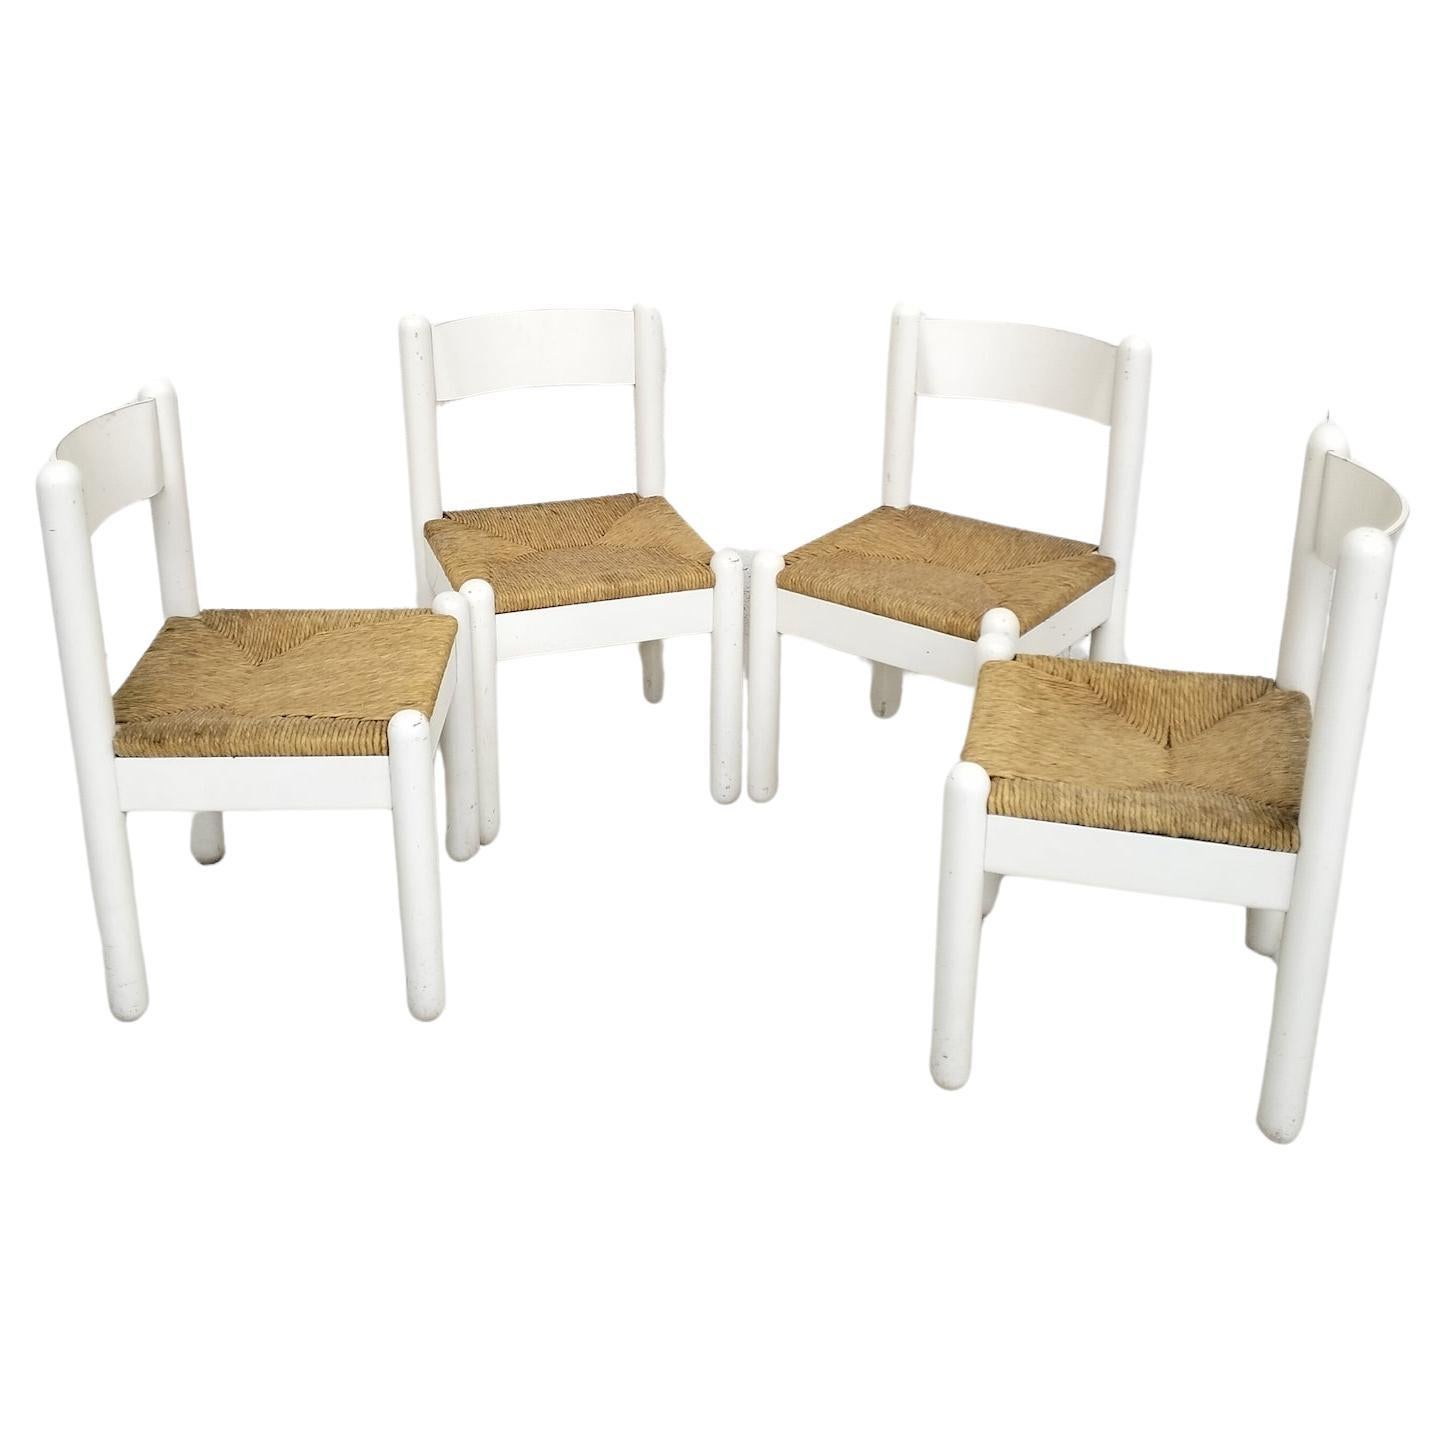 Set of 4 oak chairs  in the style of Charlotte Perriand  60's